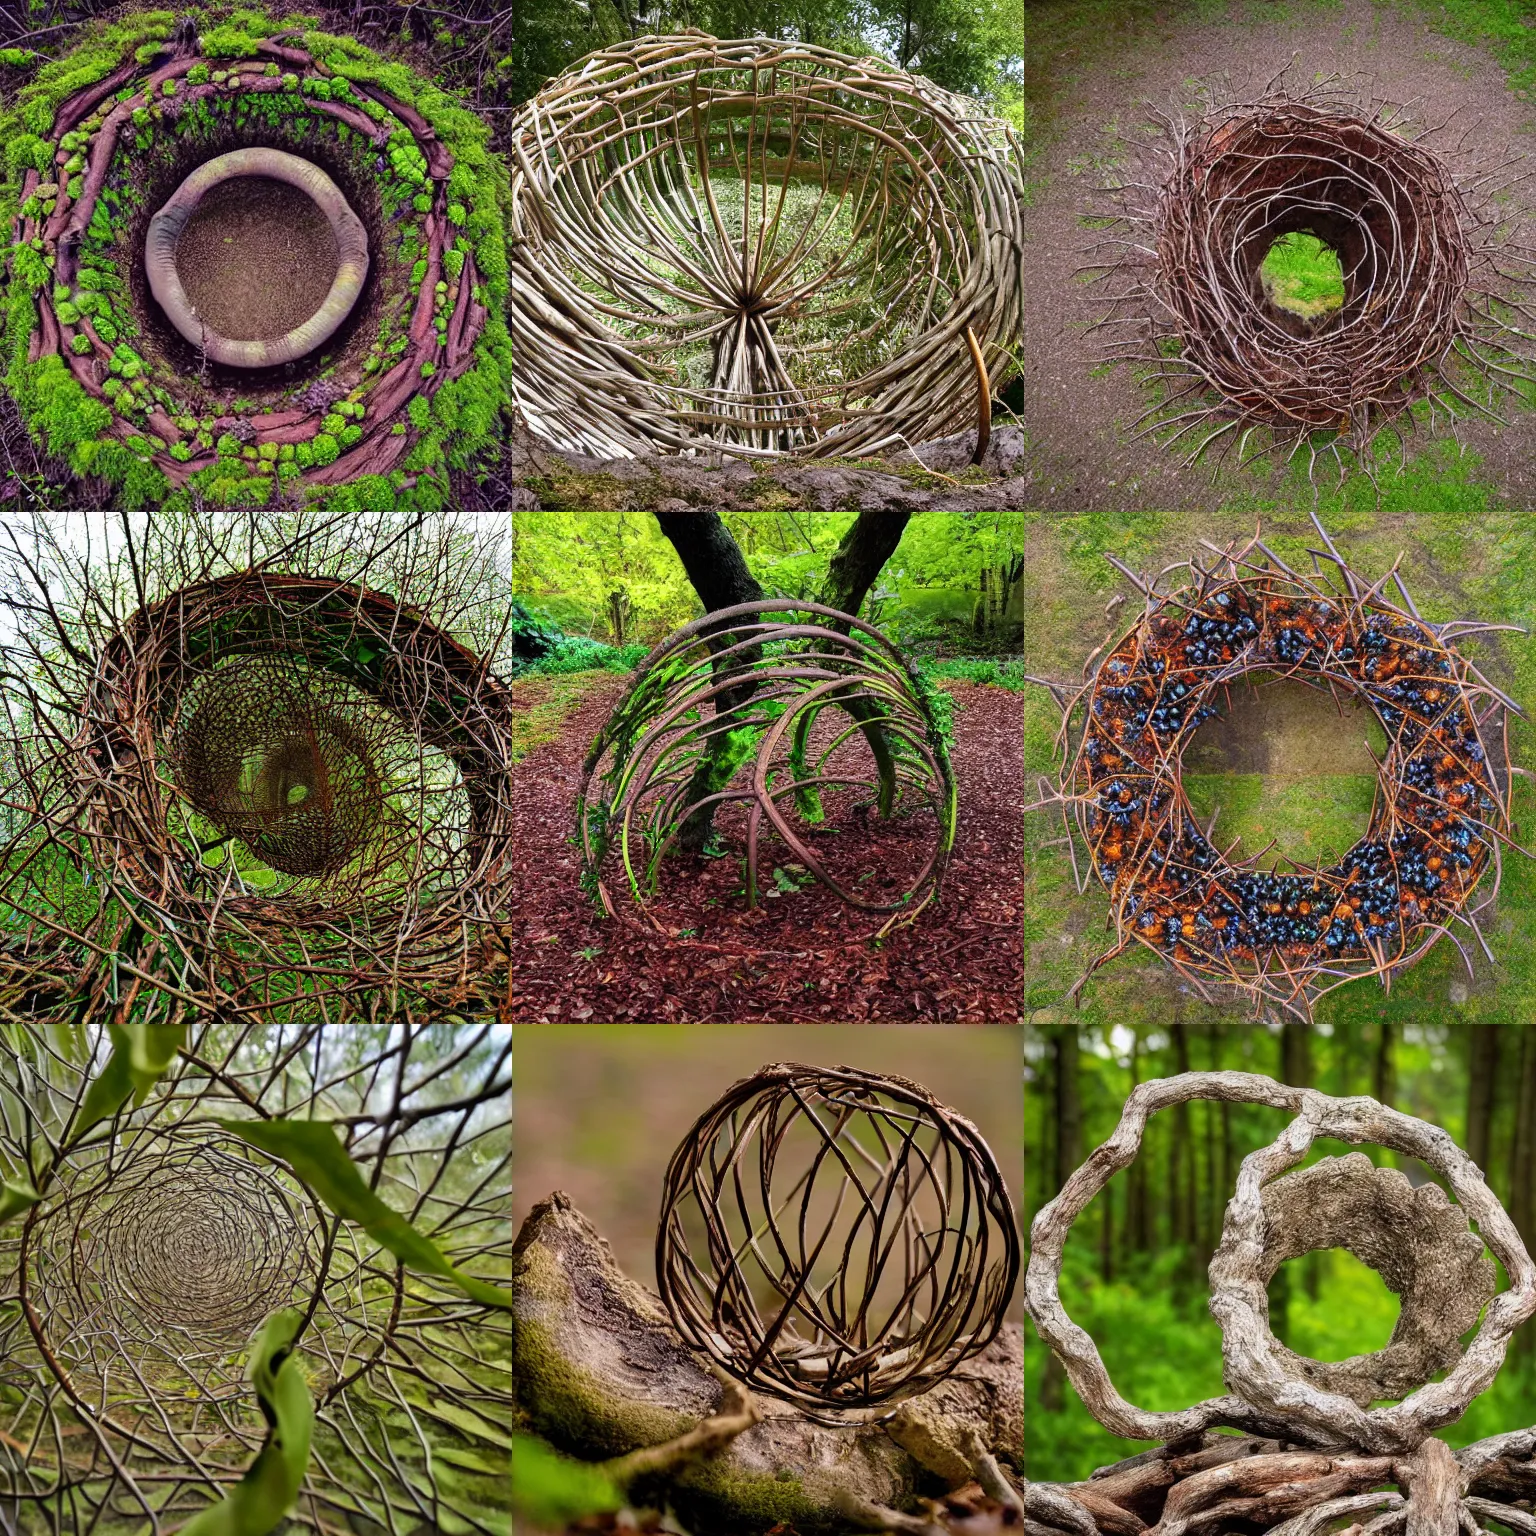 Prompt: an environment art sculpture by Nils-Udo, leaves twigs wood, nature, natural, round form, berries inside centre of structure, leaf spiral pattern around structure